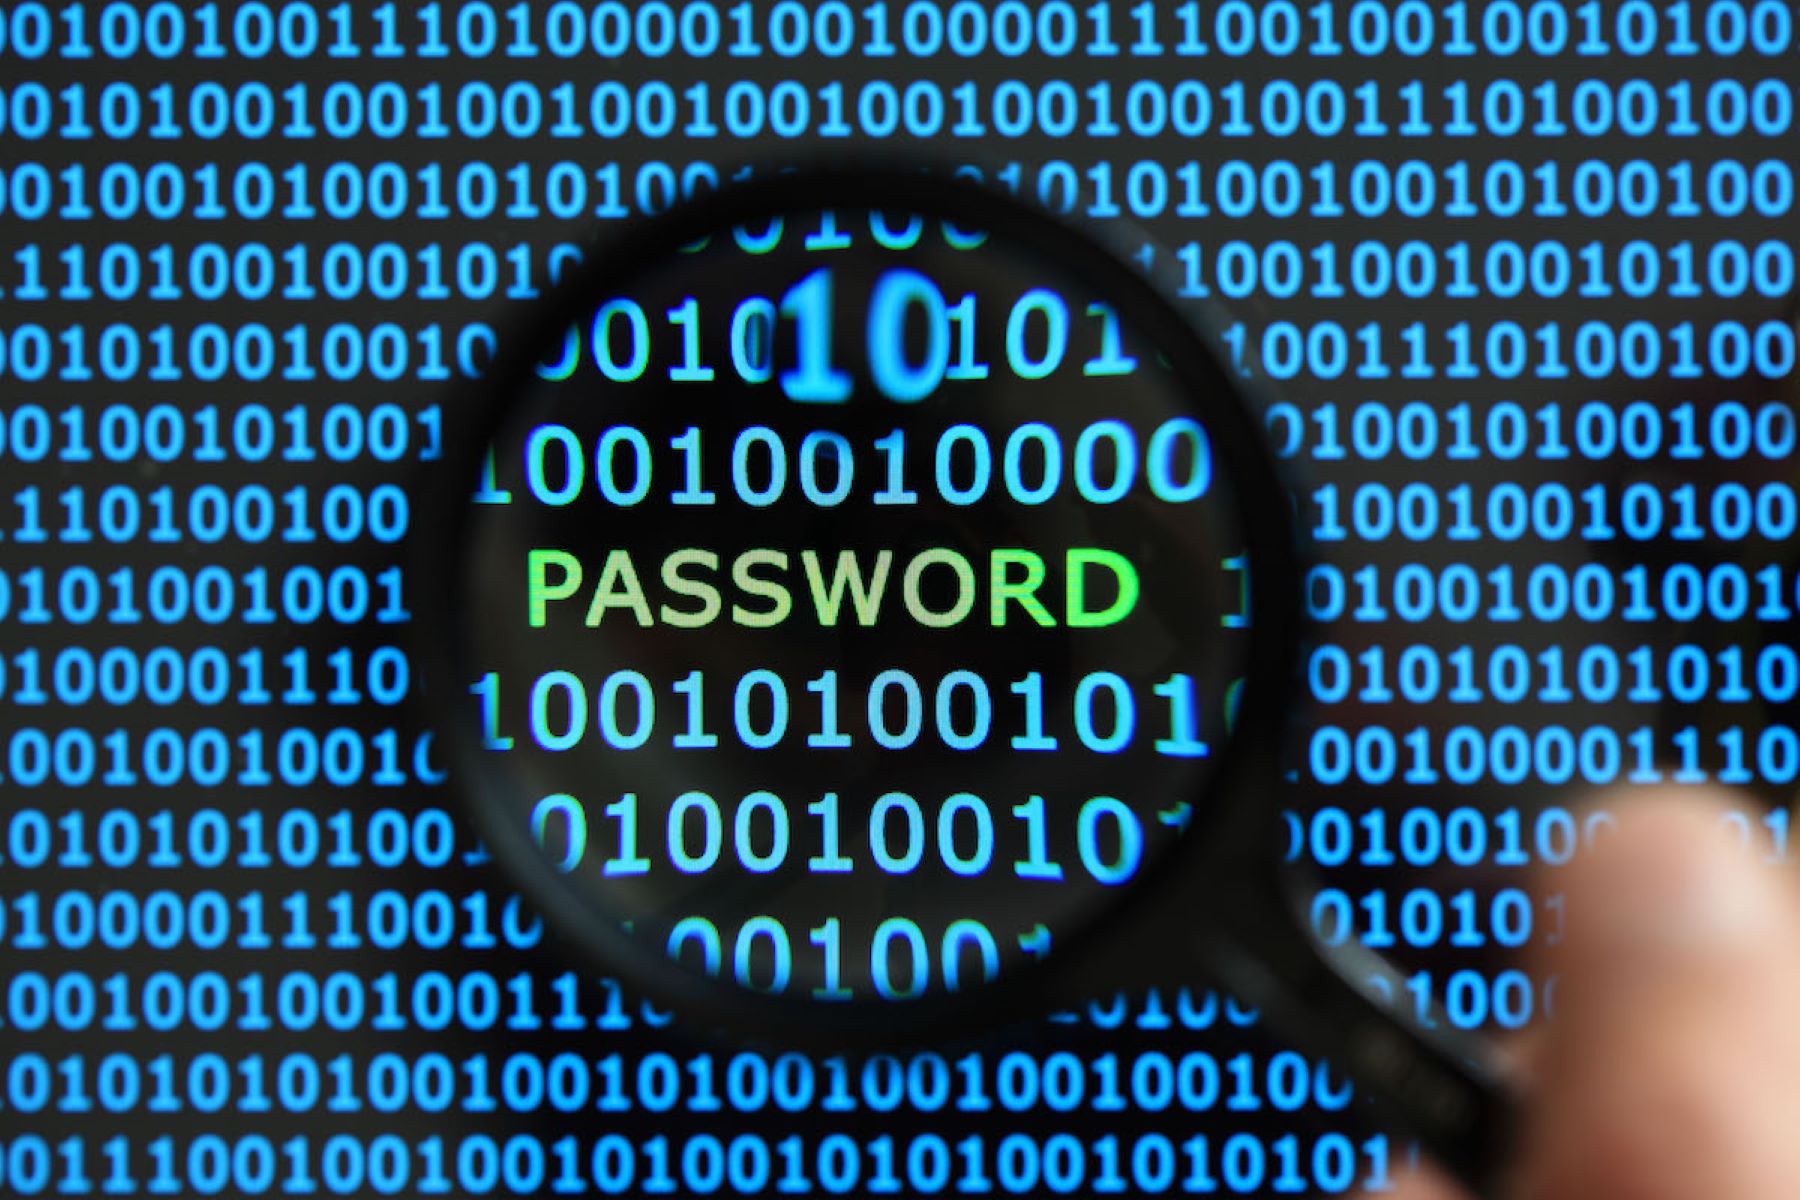 LogicMonitor Customers At Risk Of Hacking Due To Default Passwords